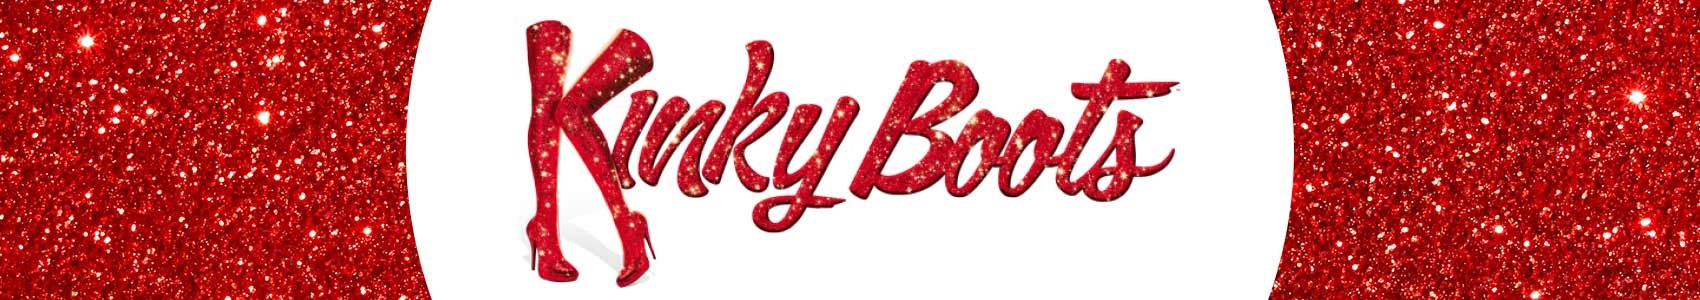 Kinky Boots announces international star in lead role of Lola